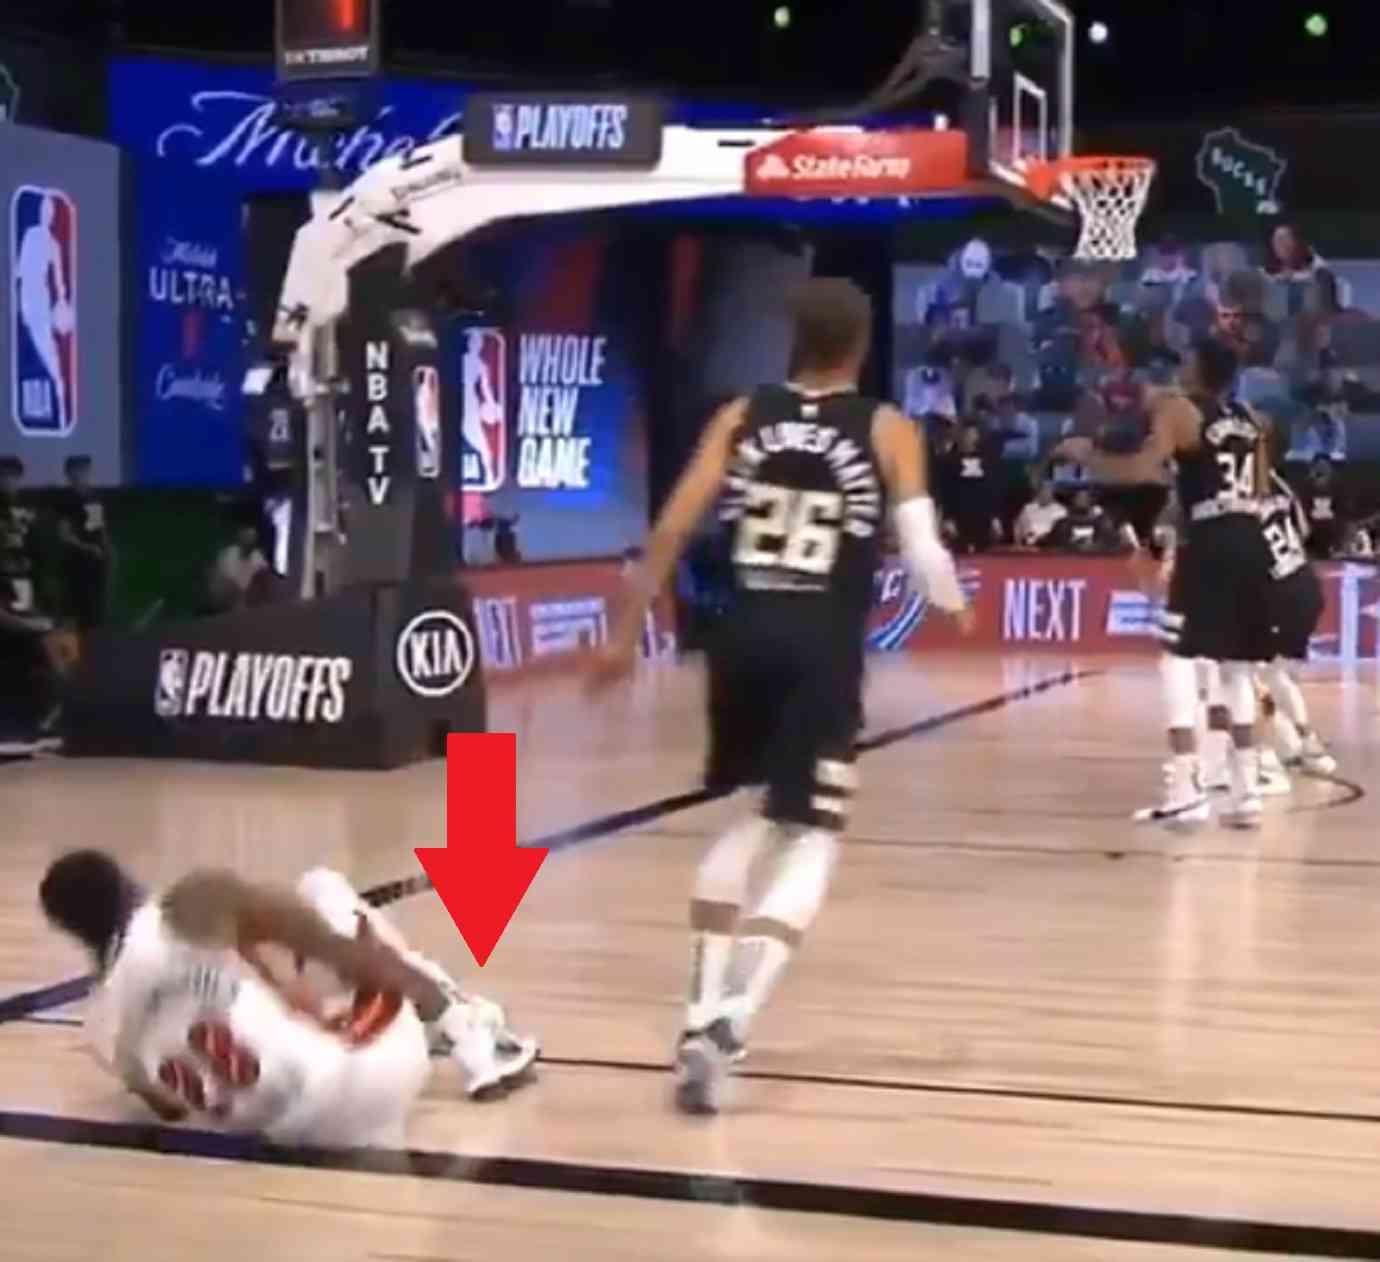 Kyle Korver Becomes Zaza Pachulia and Injures Andre Iguodala's Ankle by Sliding his Foot Under Him